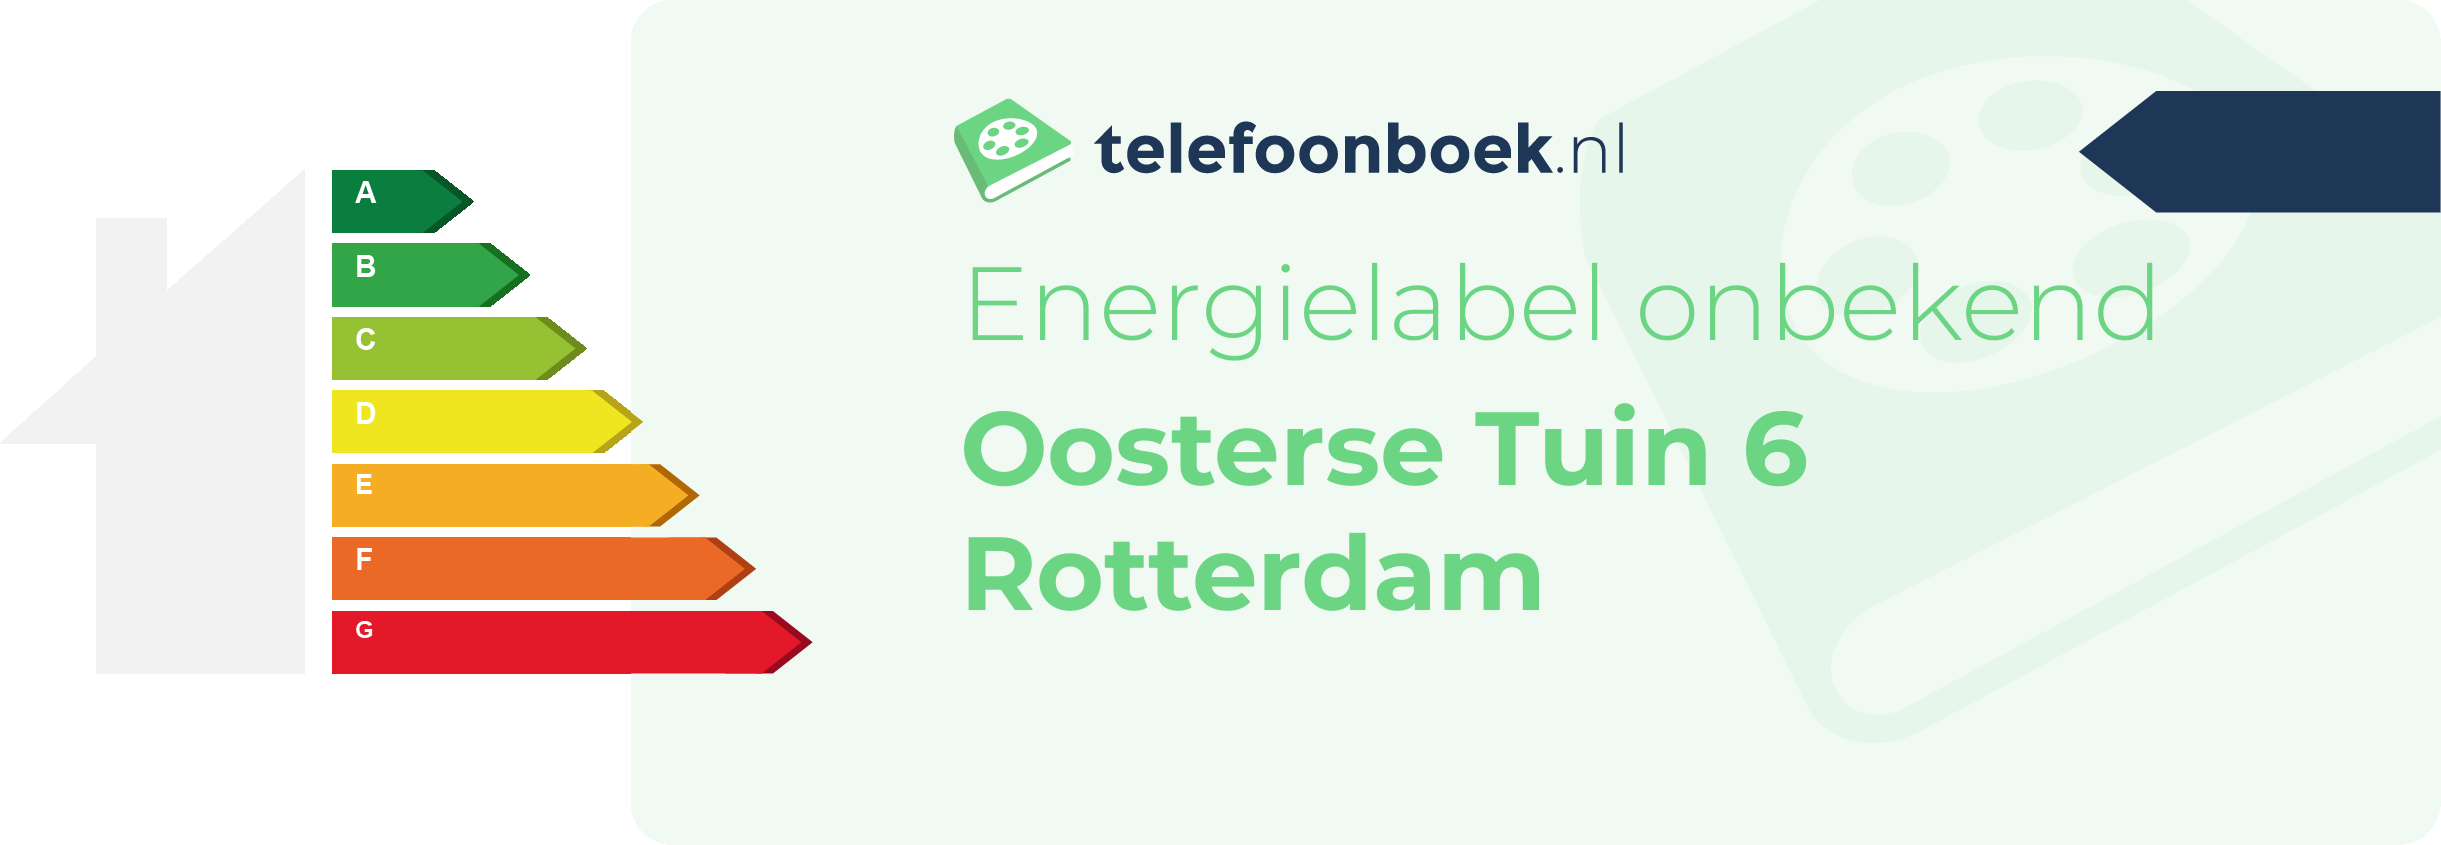 Energielabel Oosterse Tuin 6 Rotterdam